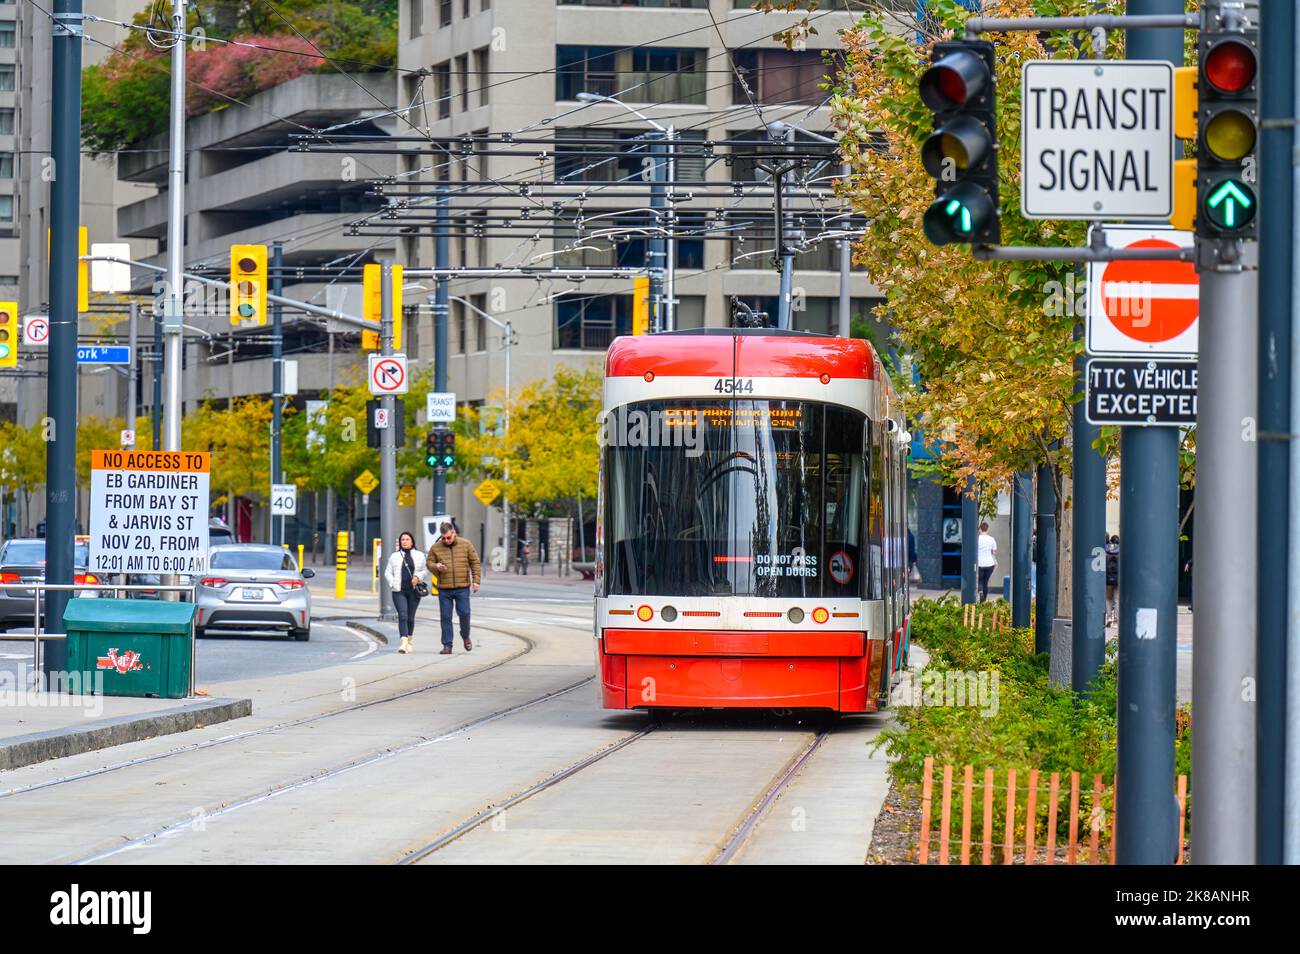 Bombardier streetcar or tram in the waterfront district. The light rail transport is iconic in the Canadian city. Stock Photo